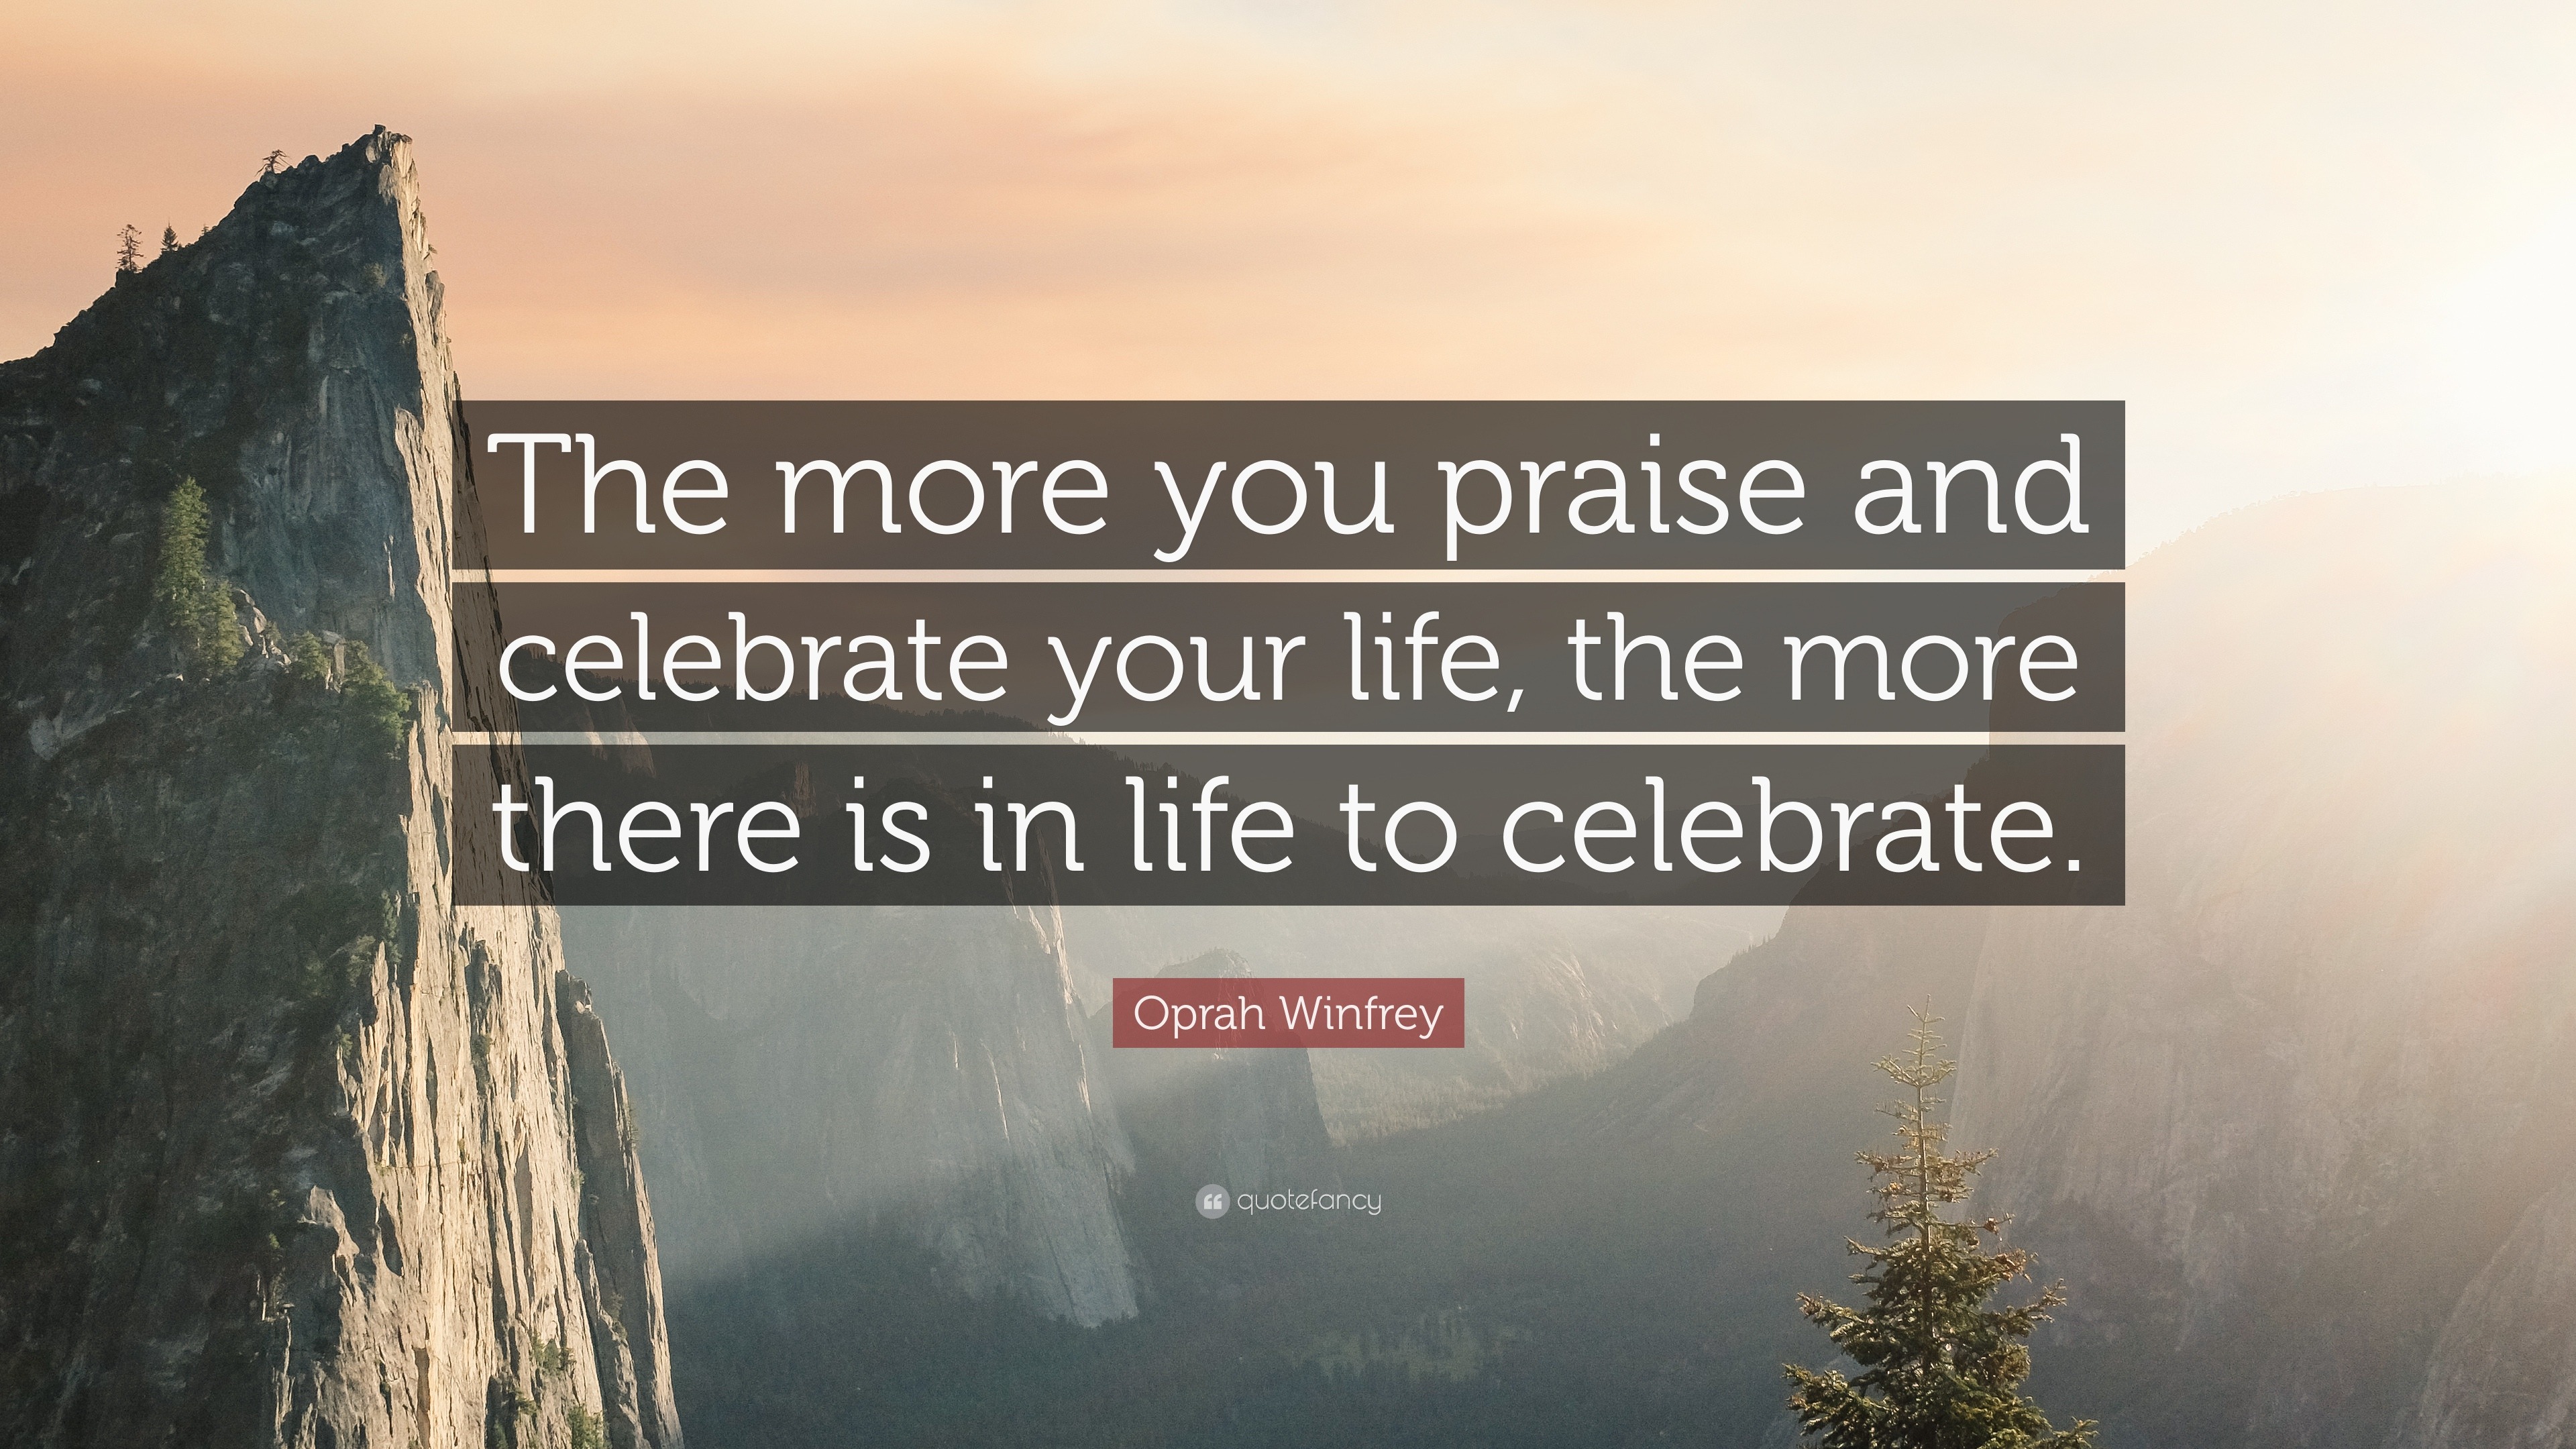 how do you celebrate your life